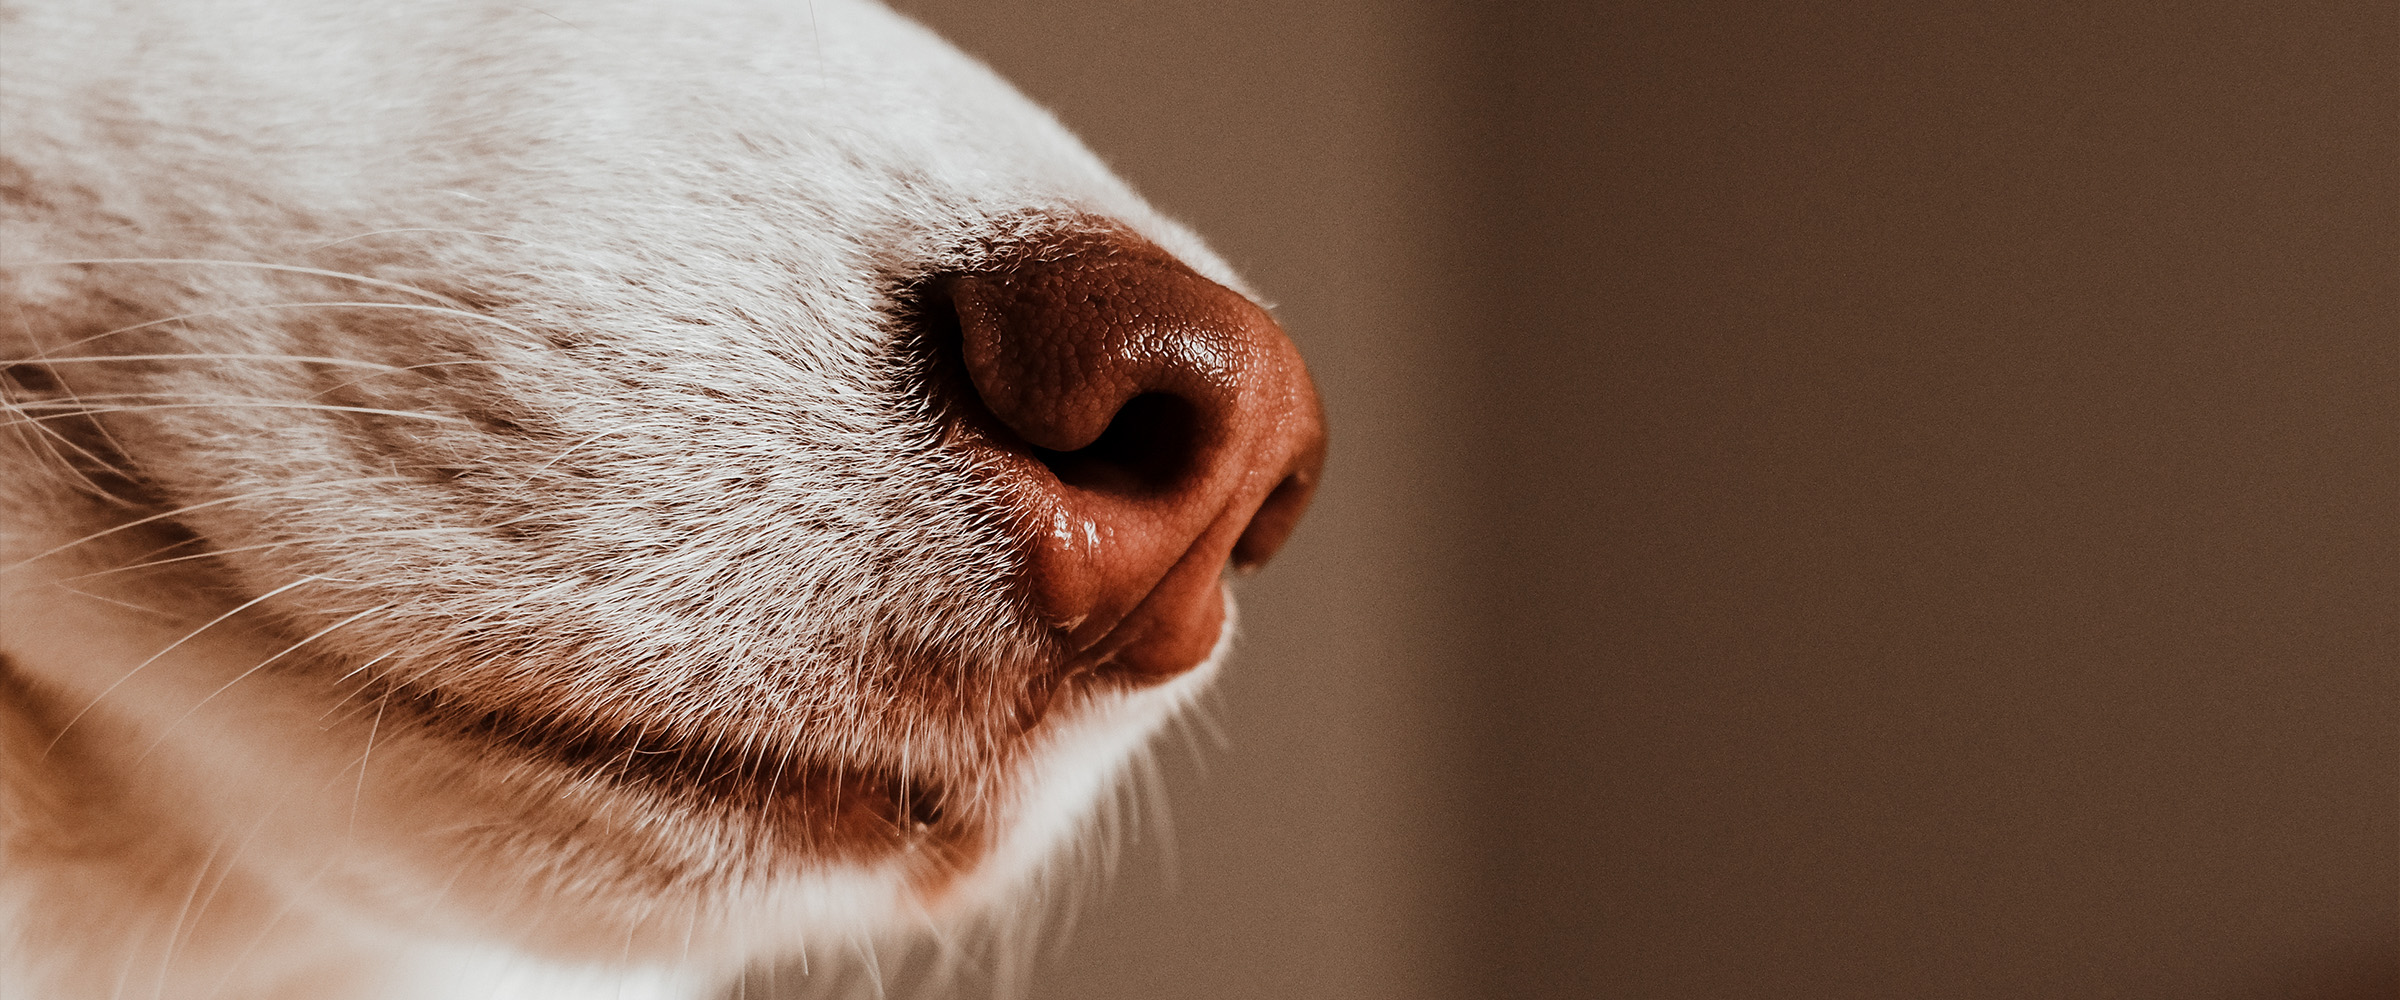 dog whiskers_2